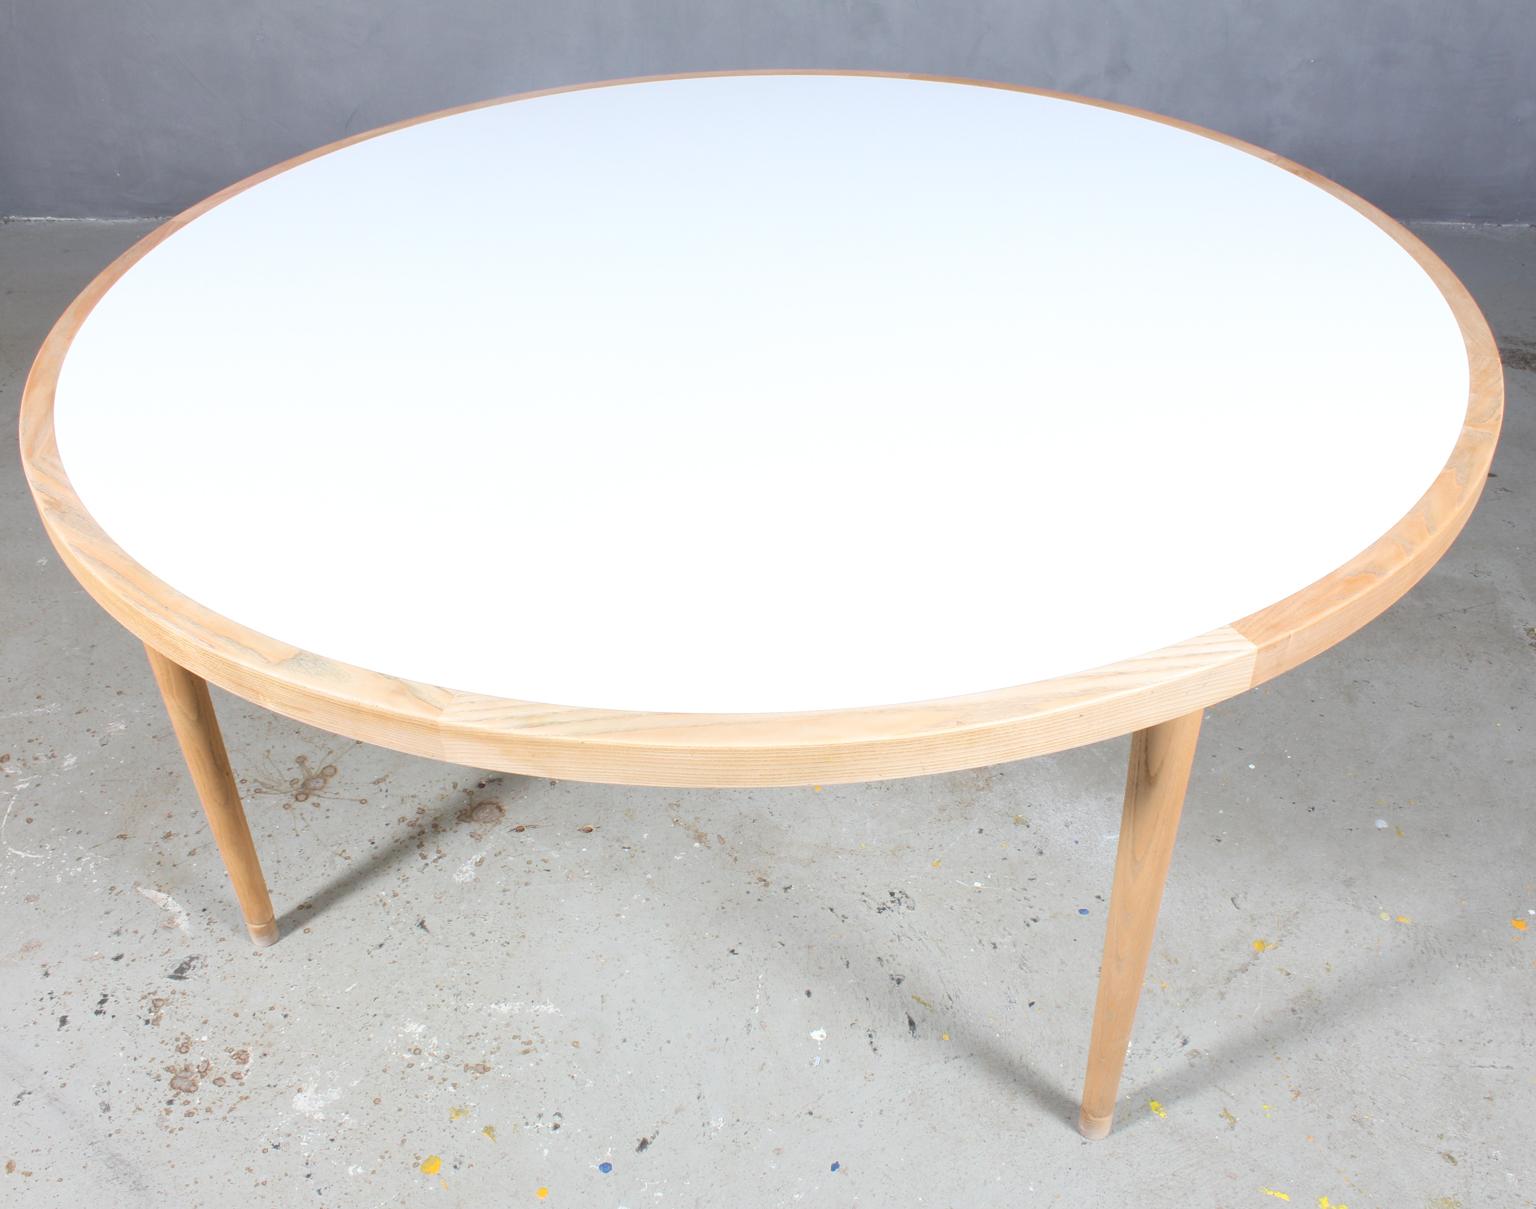 Hans J. Wegner dining table. White laminate plate with soap treated ash side.

Soap treated ash legs.

Made by PP møbler.